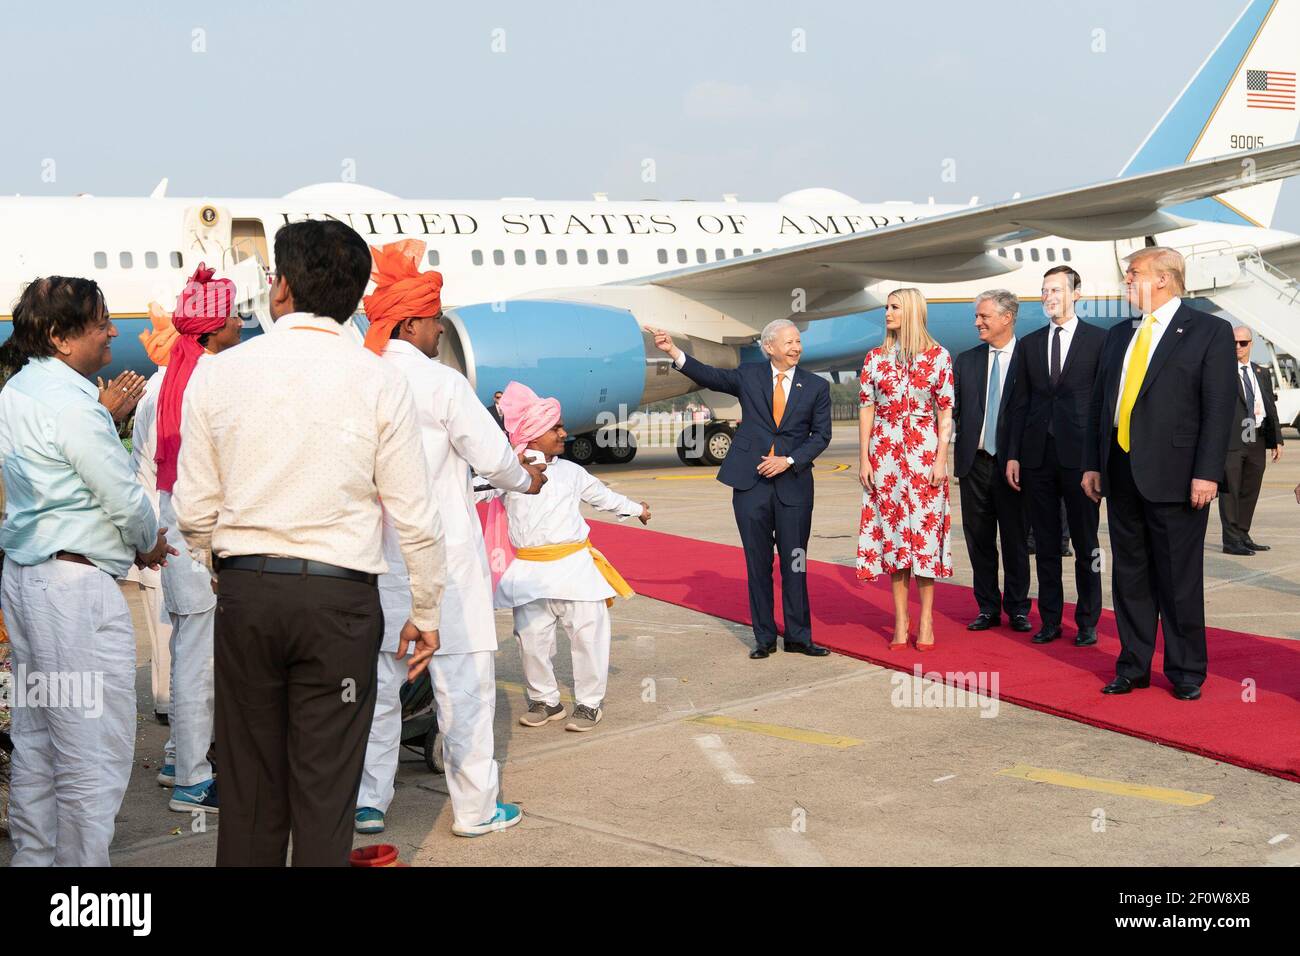 President Donald Trump and members of the U.S. delegation stop during their red-carpet arrival to view some of the 300 cultural performers Monday Feb. 24 2020 at Agra Air Base in Agra India. Stock Photo